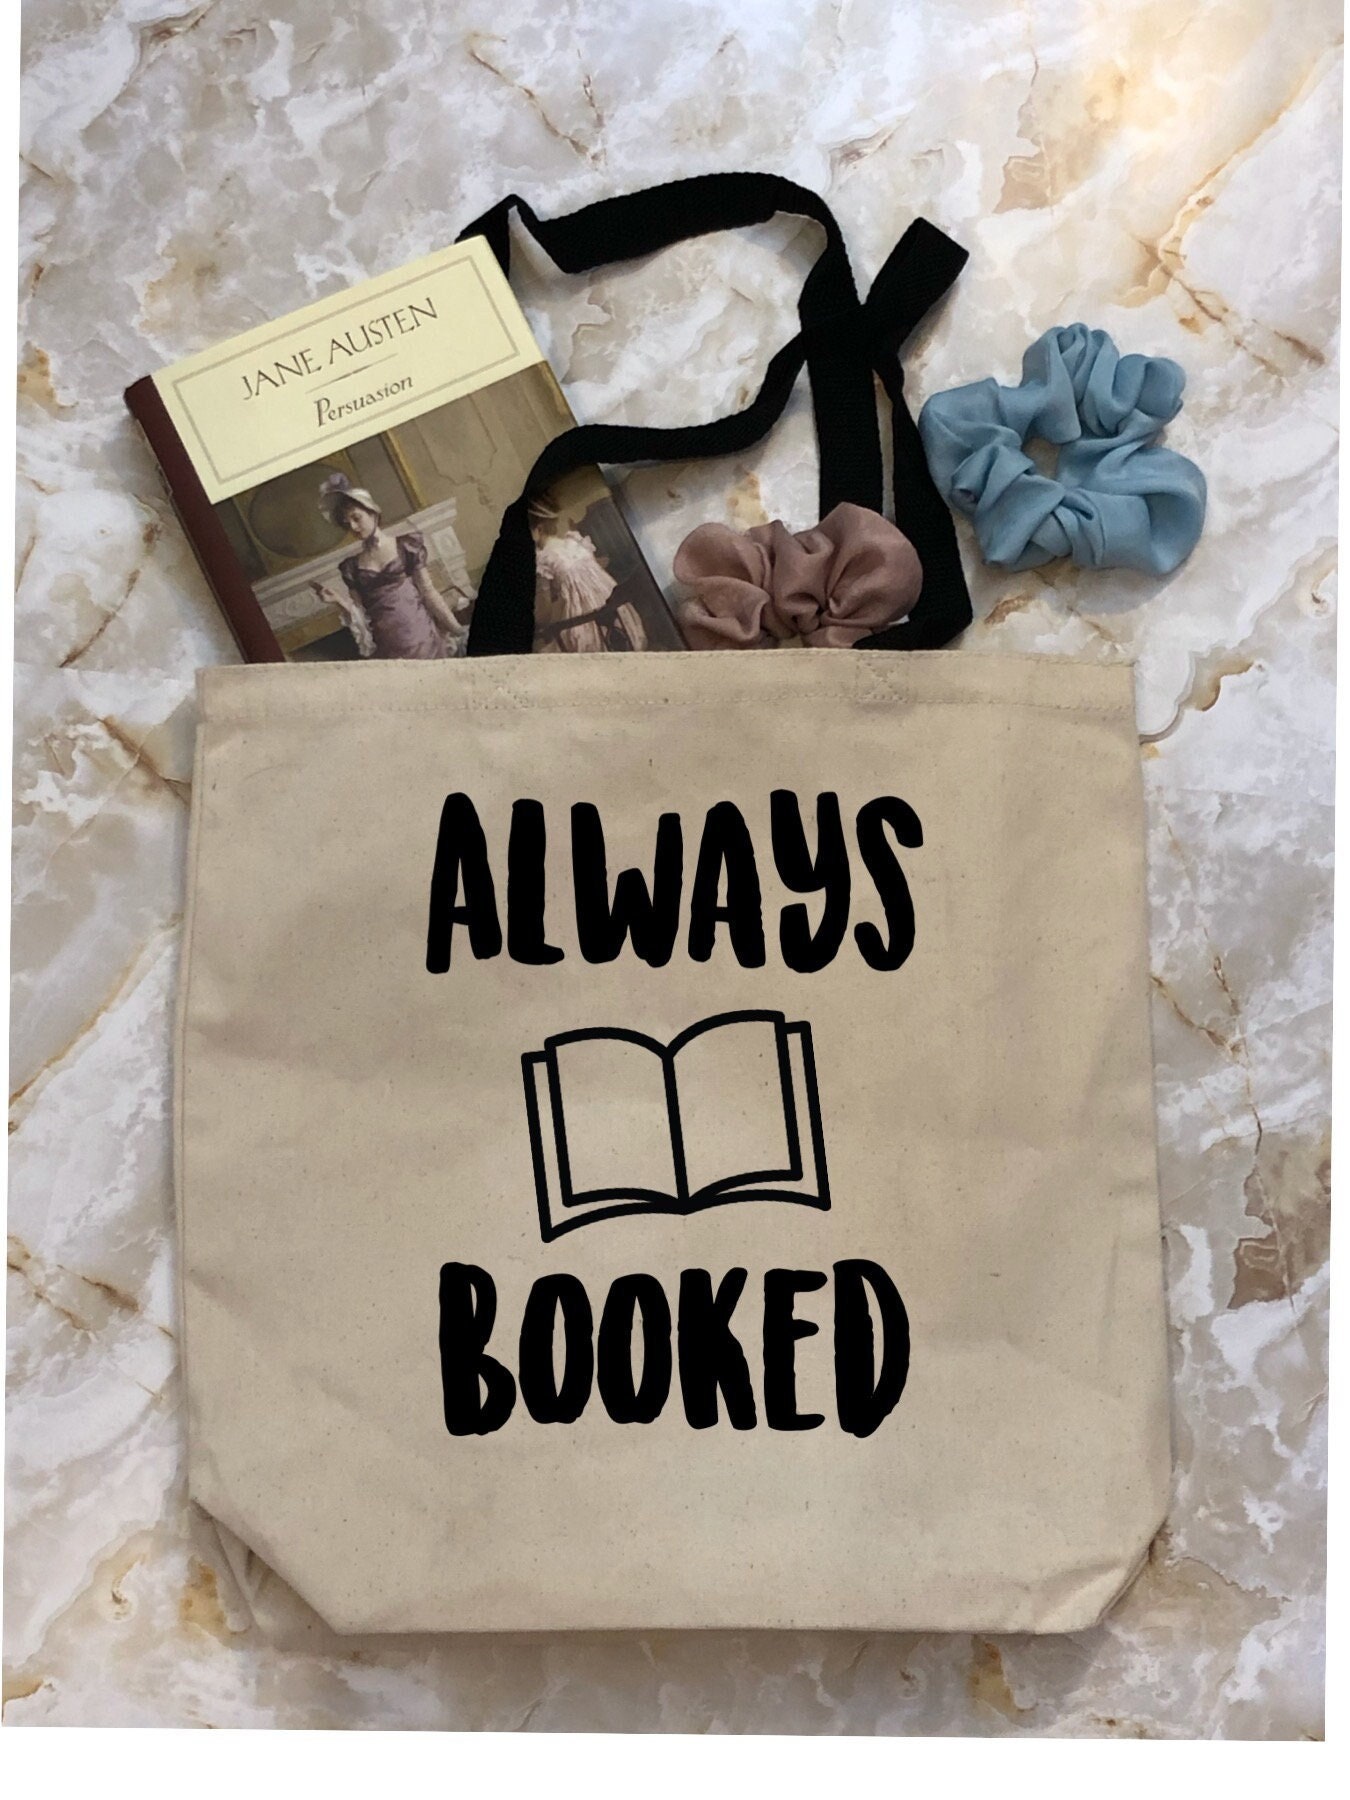 Canvas Tote Bags, Aesthetic Library Book Bags, Reusable Cute Portable Gift  Bag for Book Lovers, Washable Book School Shoulder Bag Grocery Shopping Bags  for Girl - China Girl Canvas Bag and Women